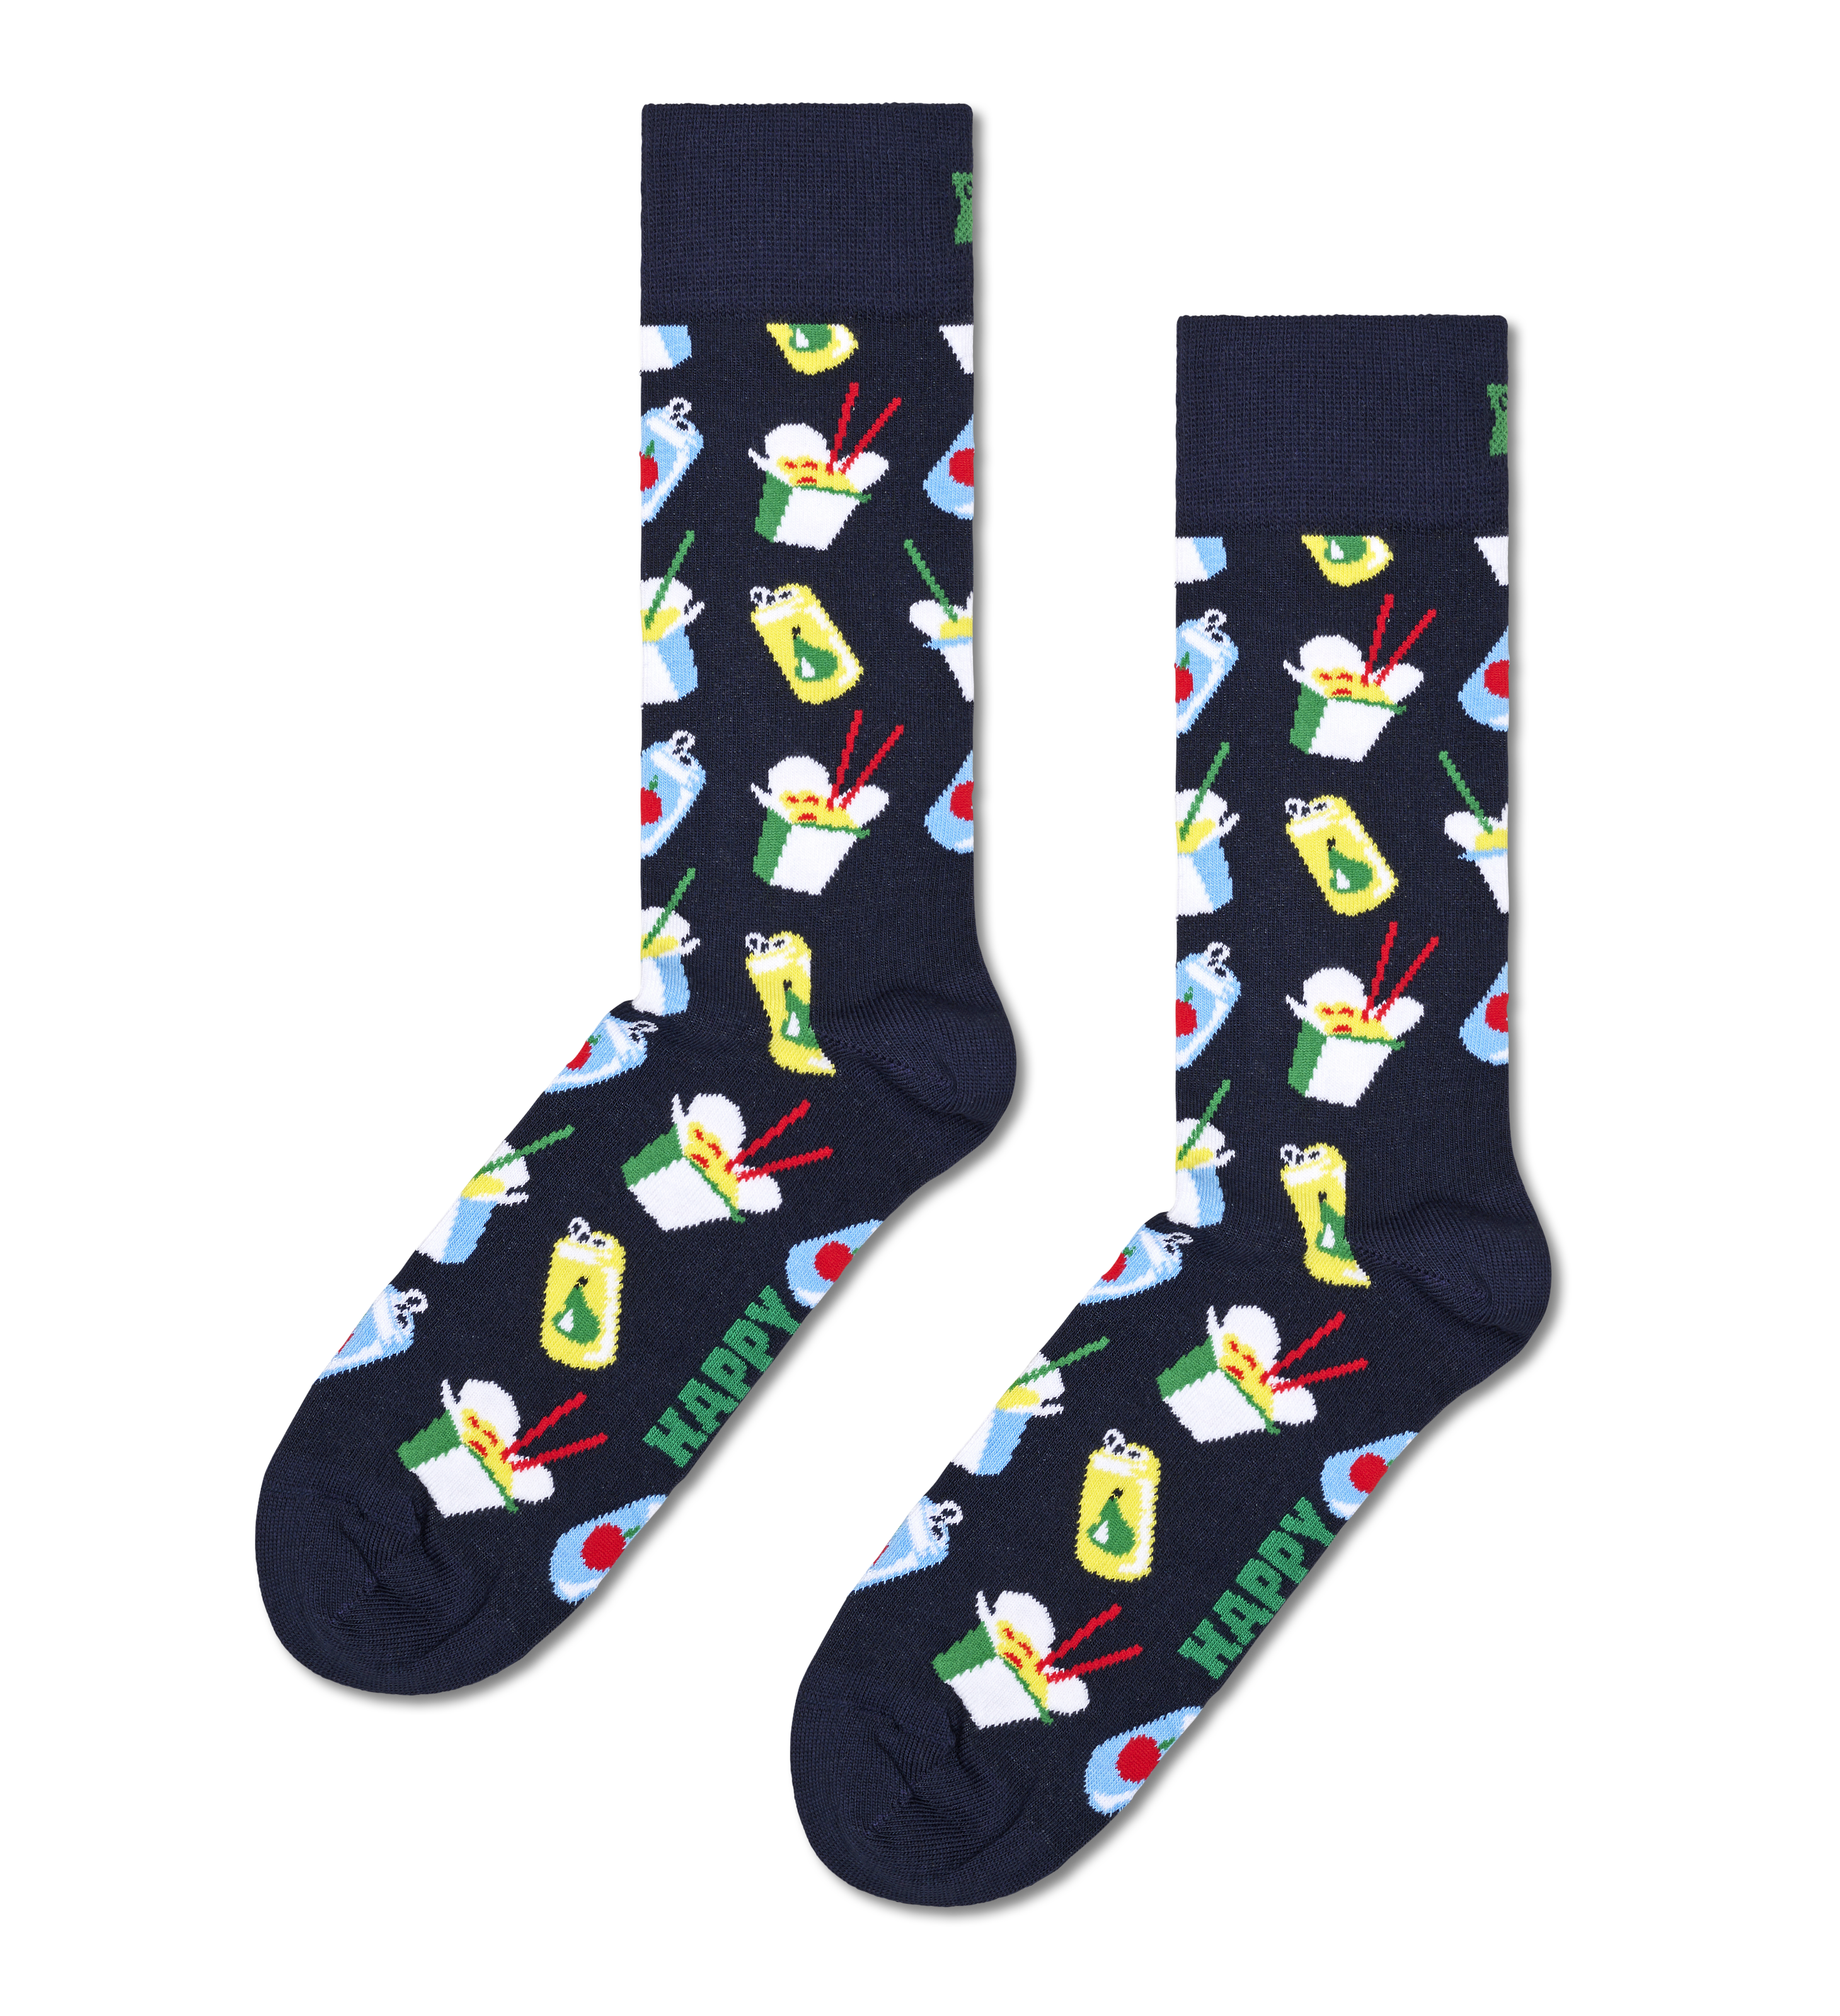  Happy Socks for Men and Women, 1 Pair, Colorful, Fun, Unique,  Food Themed Printed Patterns